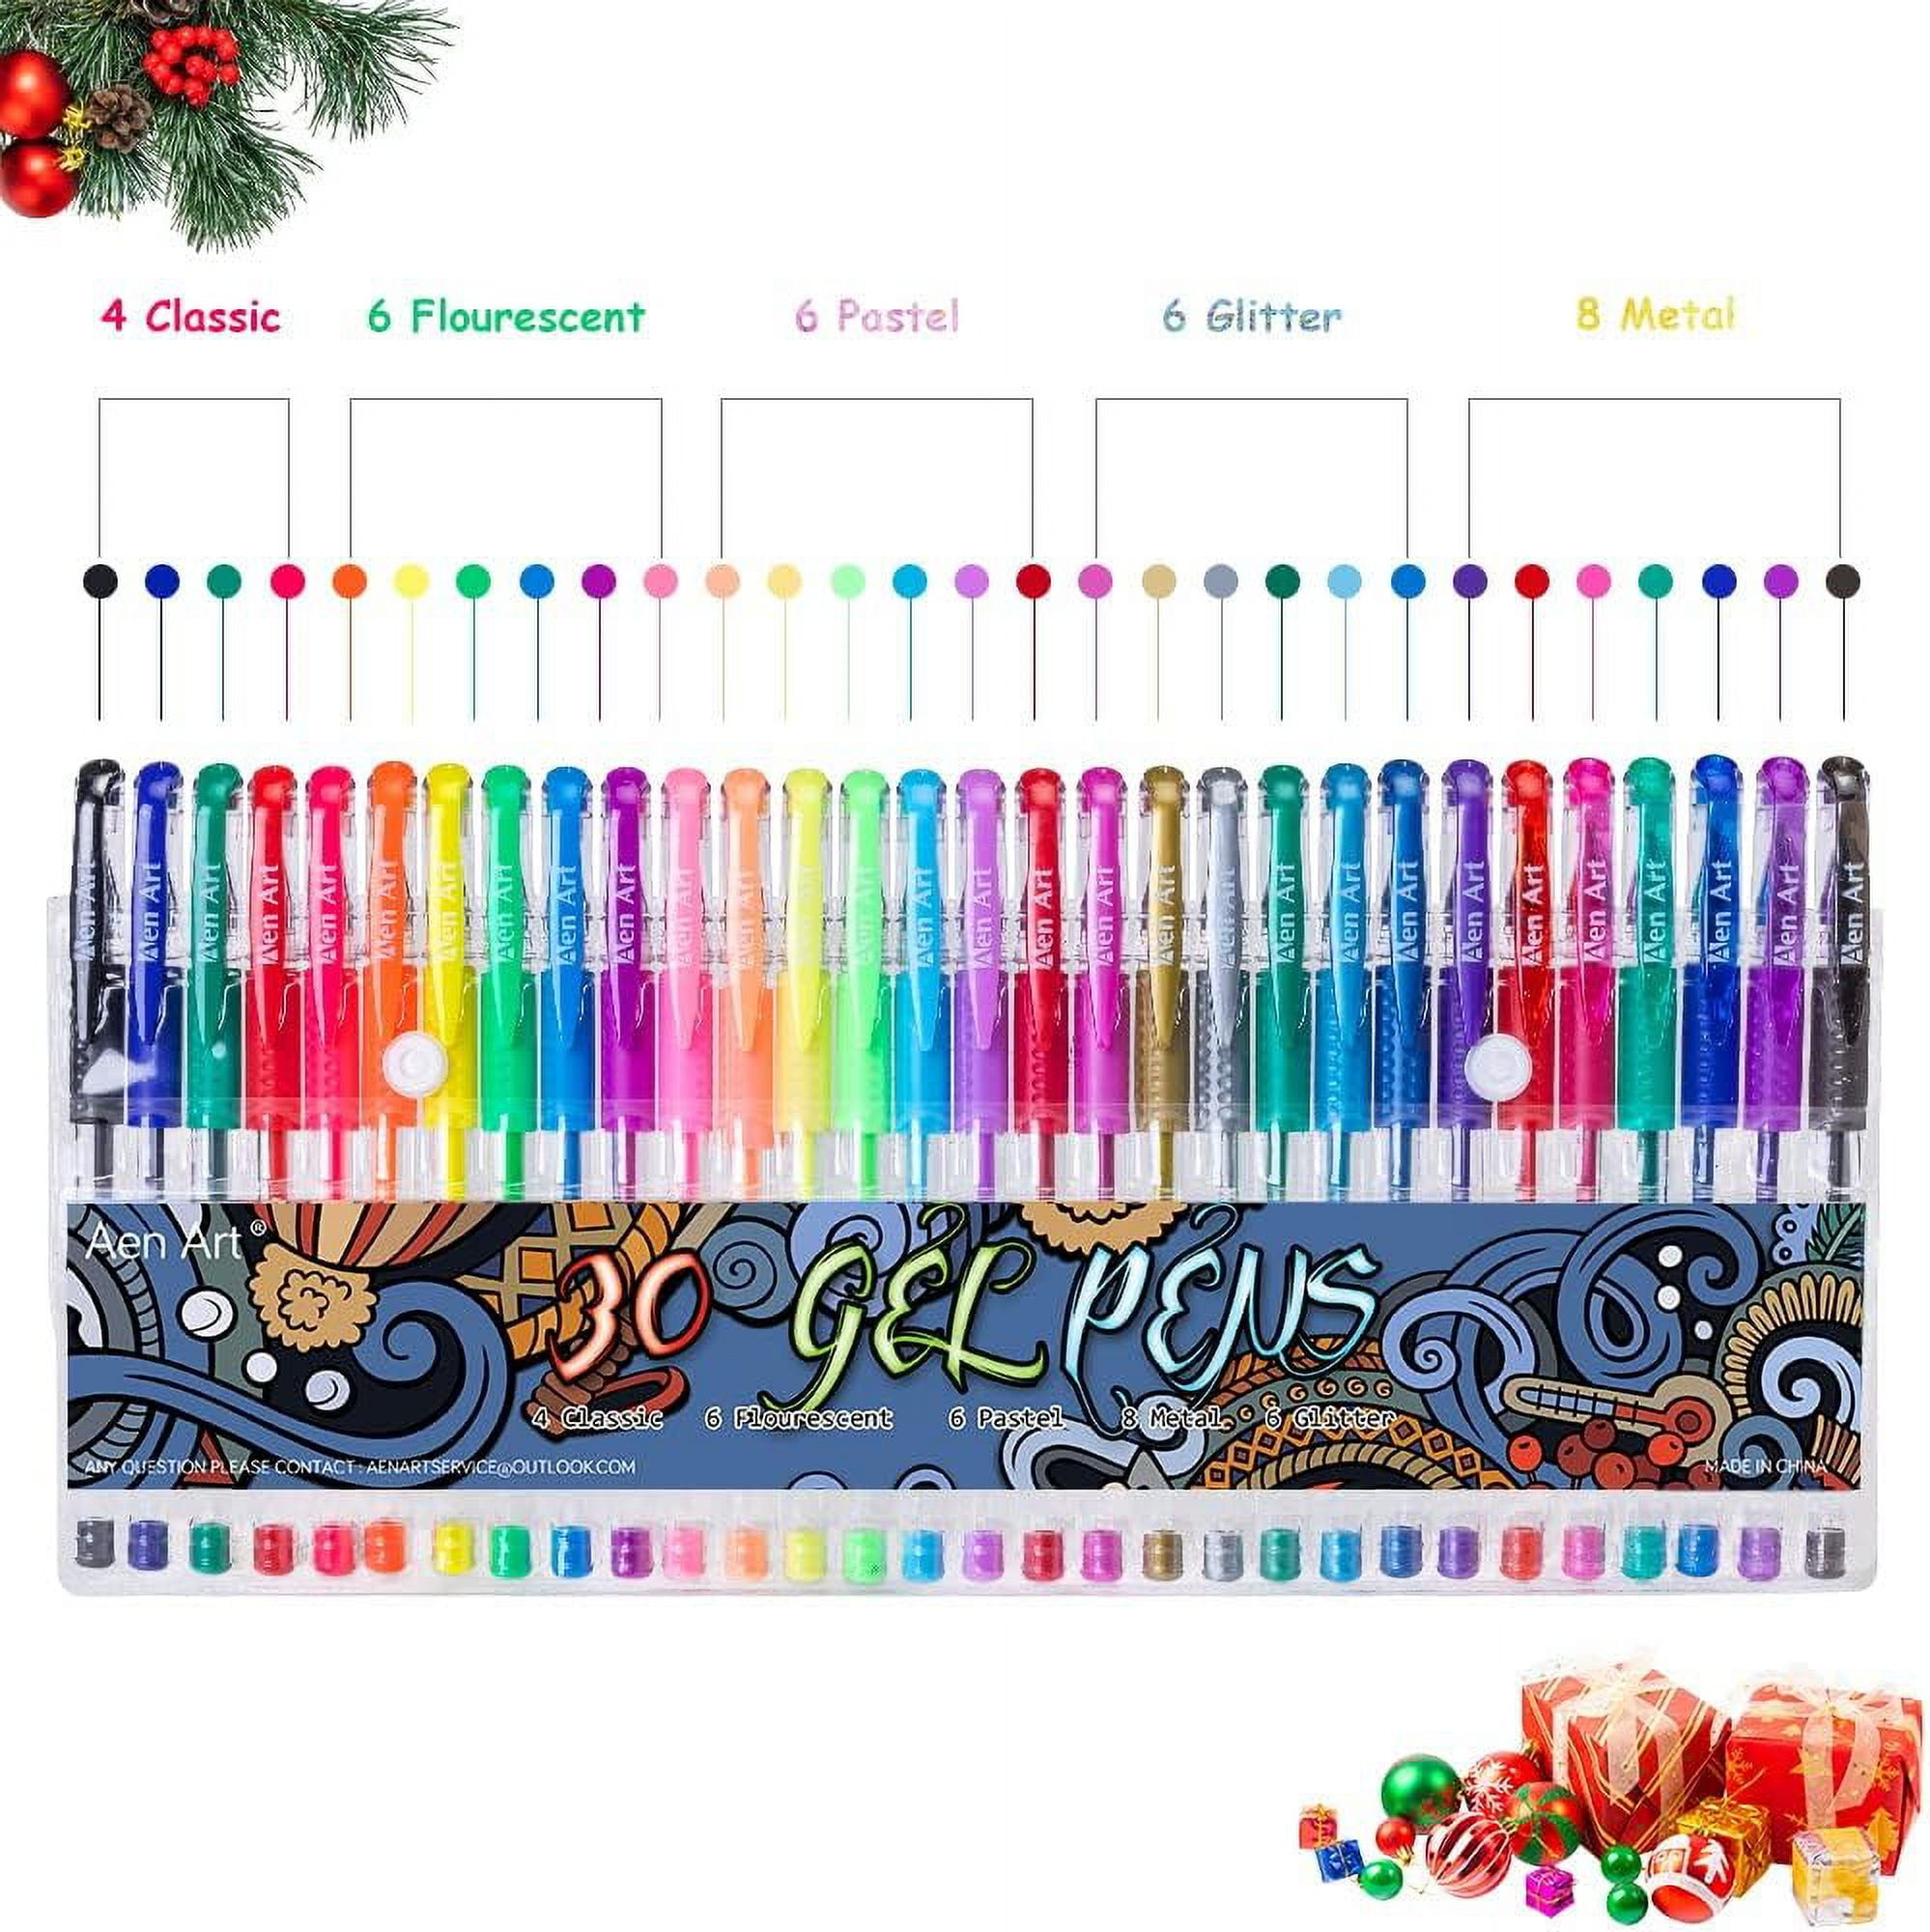 TANMIT Gel Pens, 33 Color Gel Pen Fine Point Colored Pen Set with 40% More  Ink for Adult Coloring Books, Drawing, Doodling, Scrapbooks Journaling